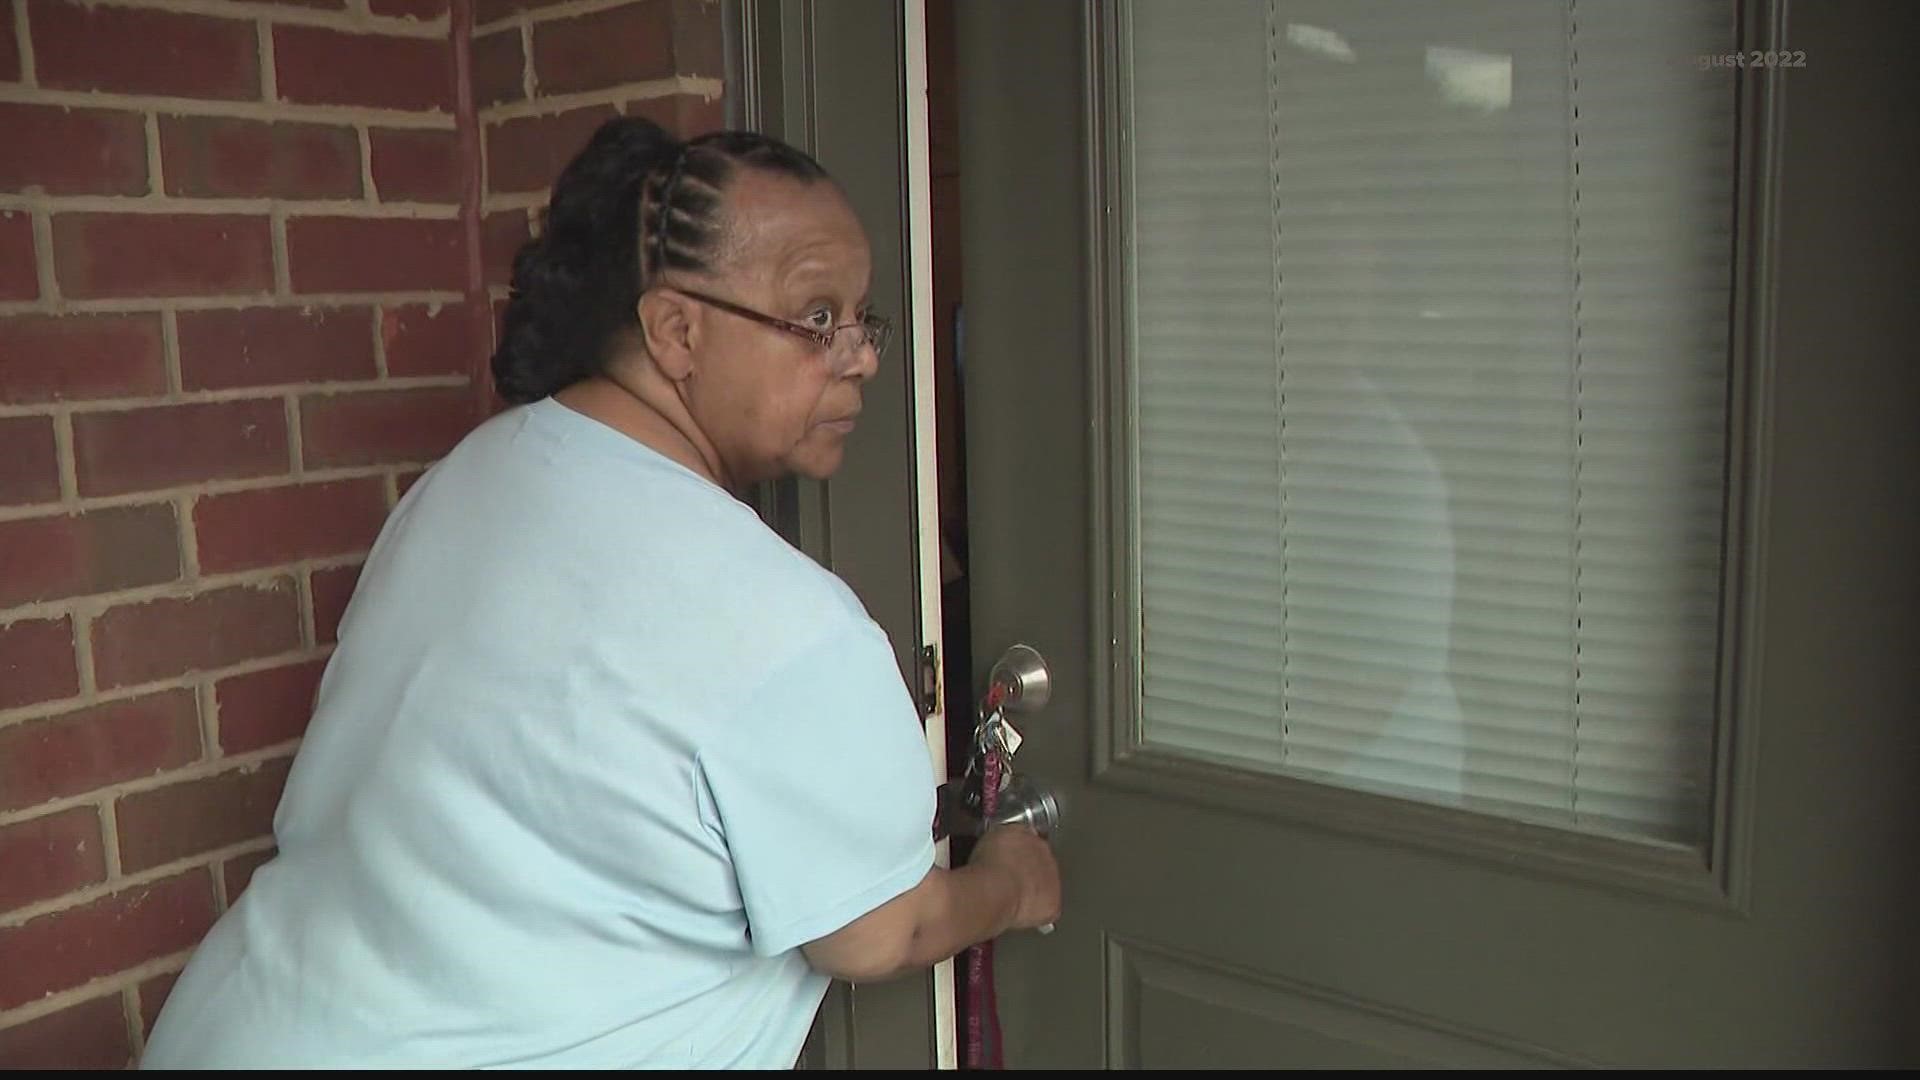 The apartment complex has fixed a number of lock issues after 11Alive's Paola Suro ran a story on the problem in late August.